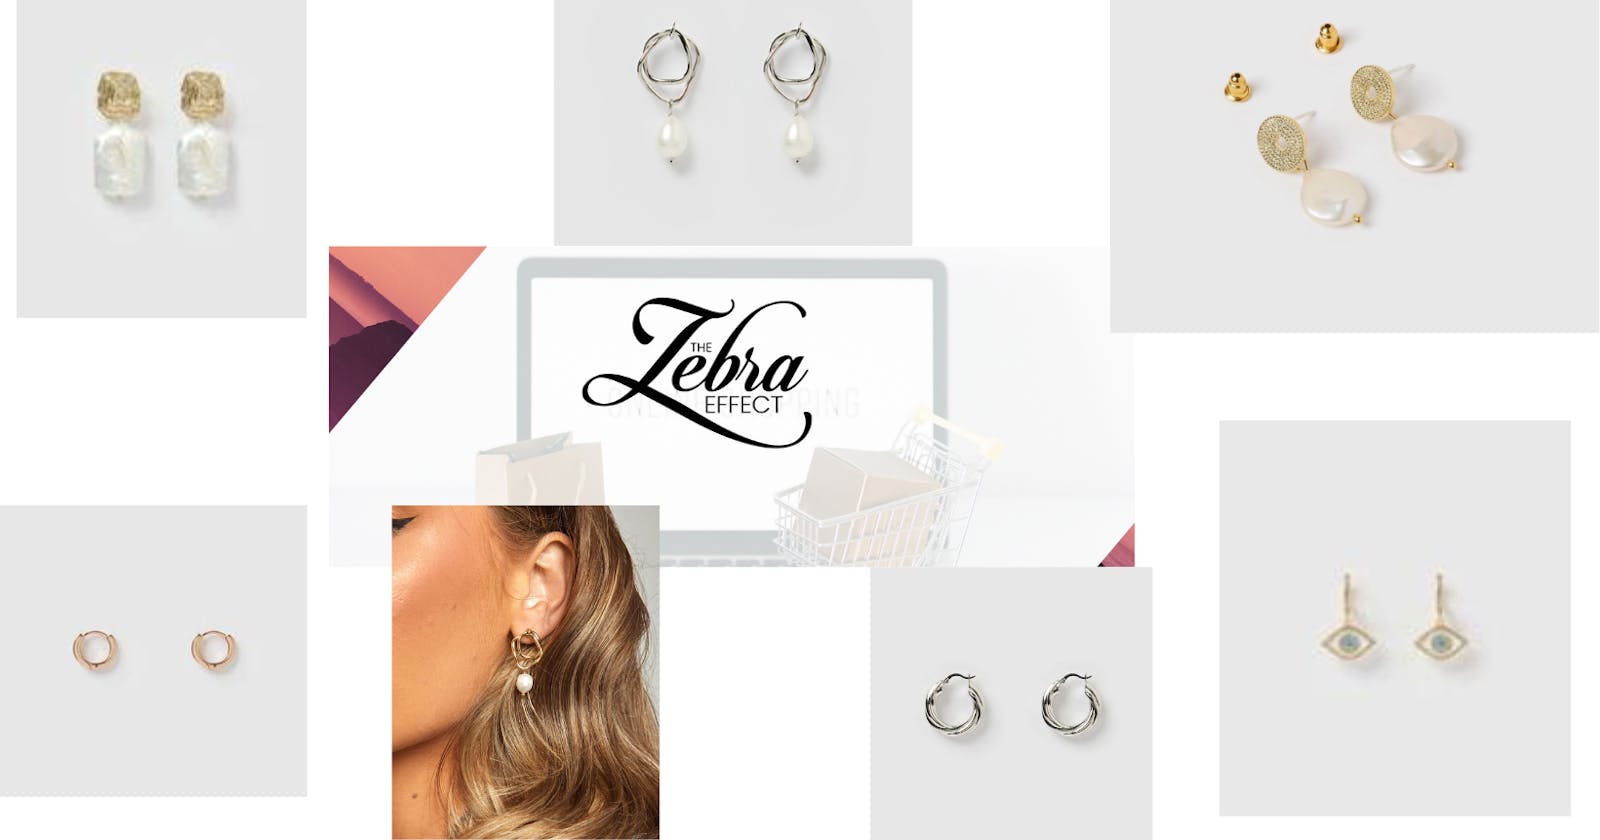 The Best Collection of Jewellery in Australia - Shop at The Zebra Effect